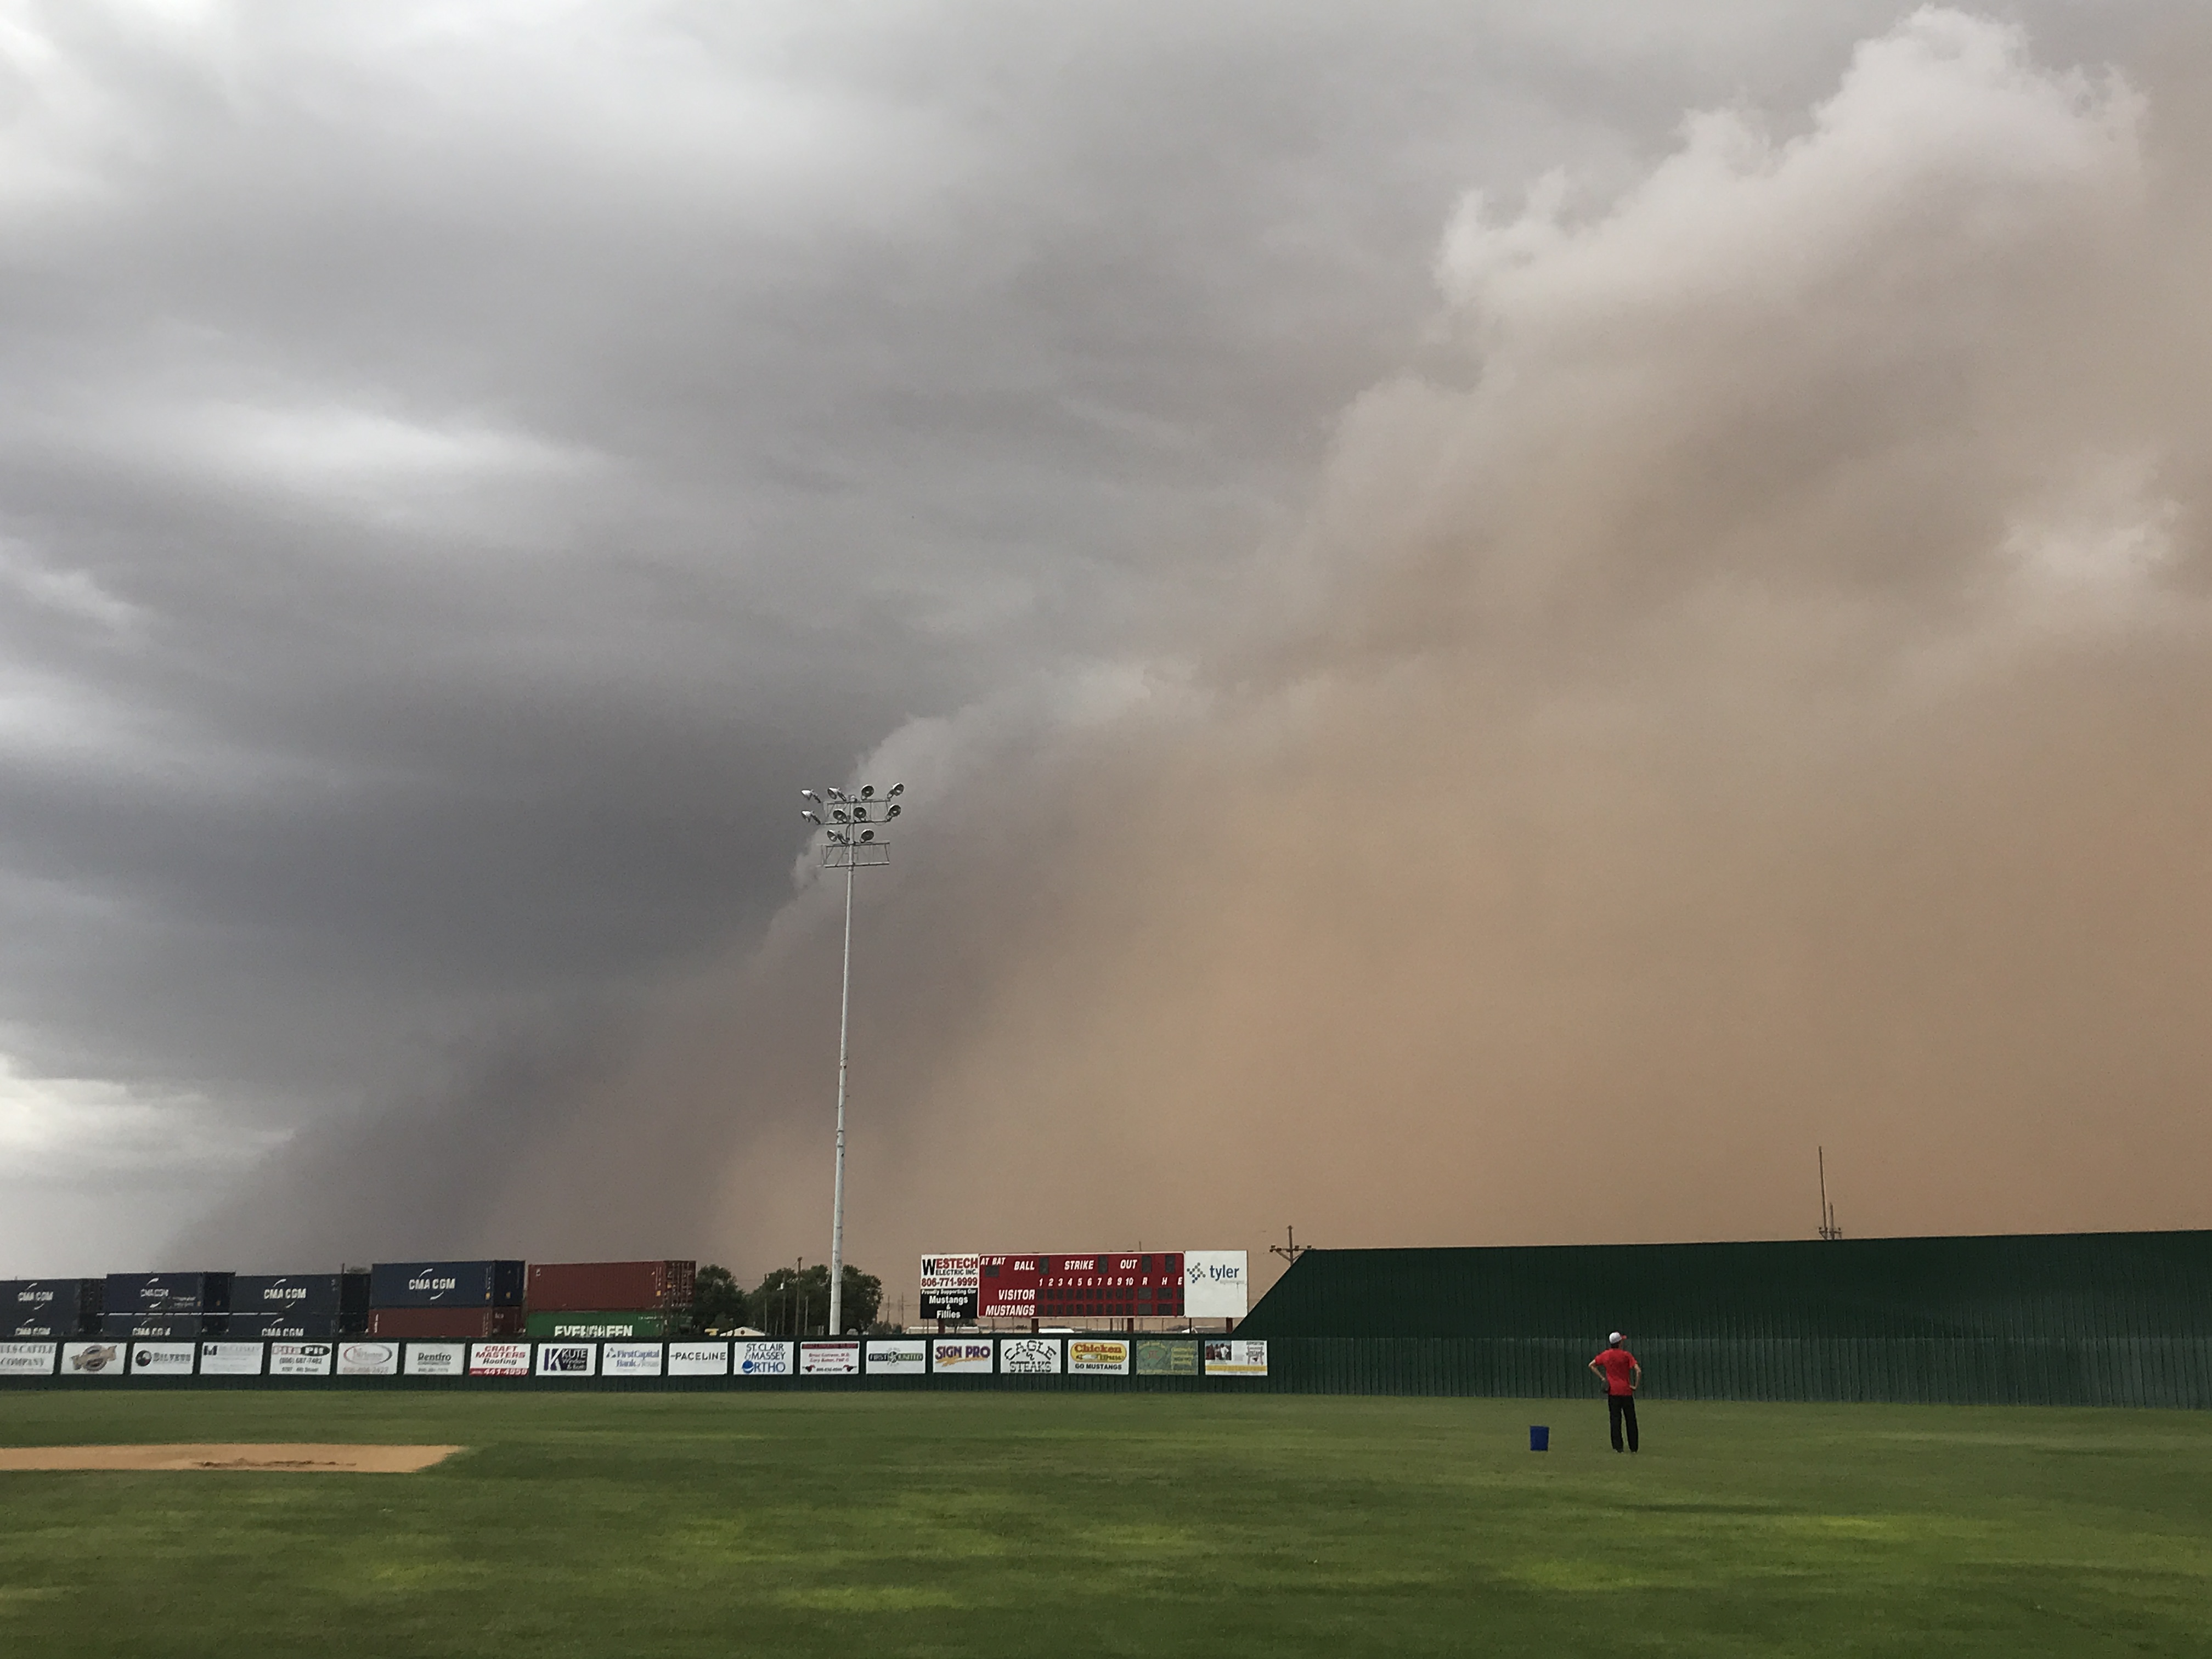 Wall of wind and dust (haboob) approaching Shallowater on Saturday evening. The picture is courtesy of Bruce Haynie.